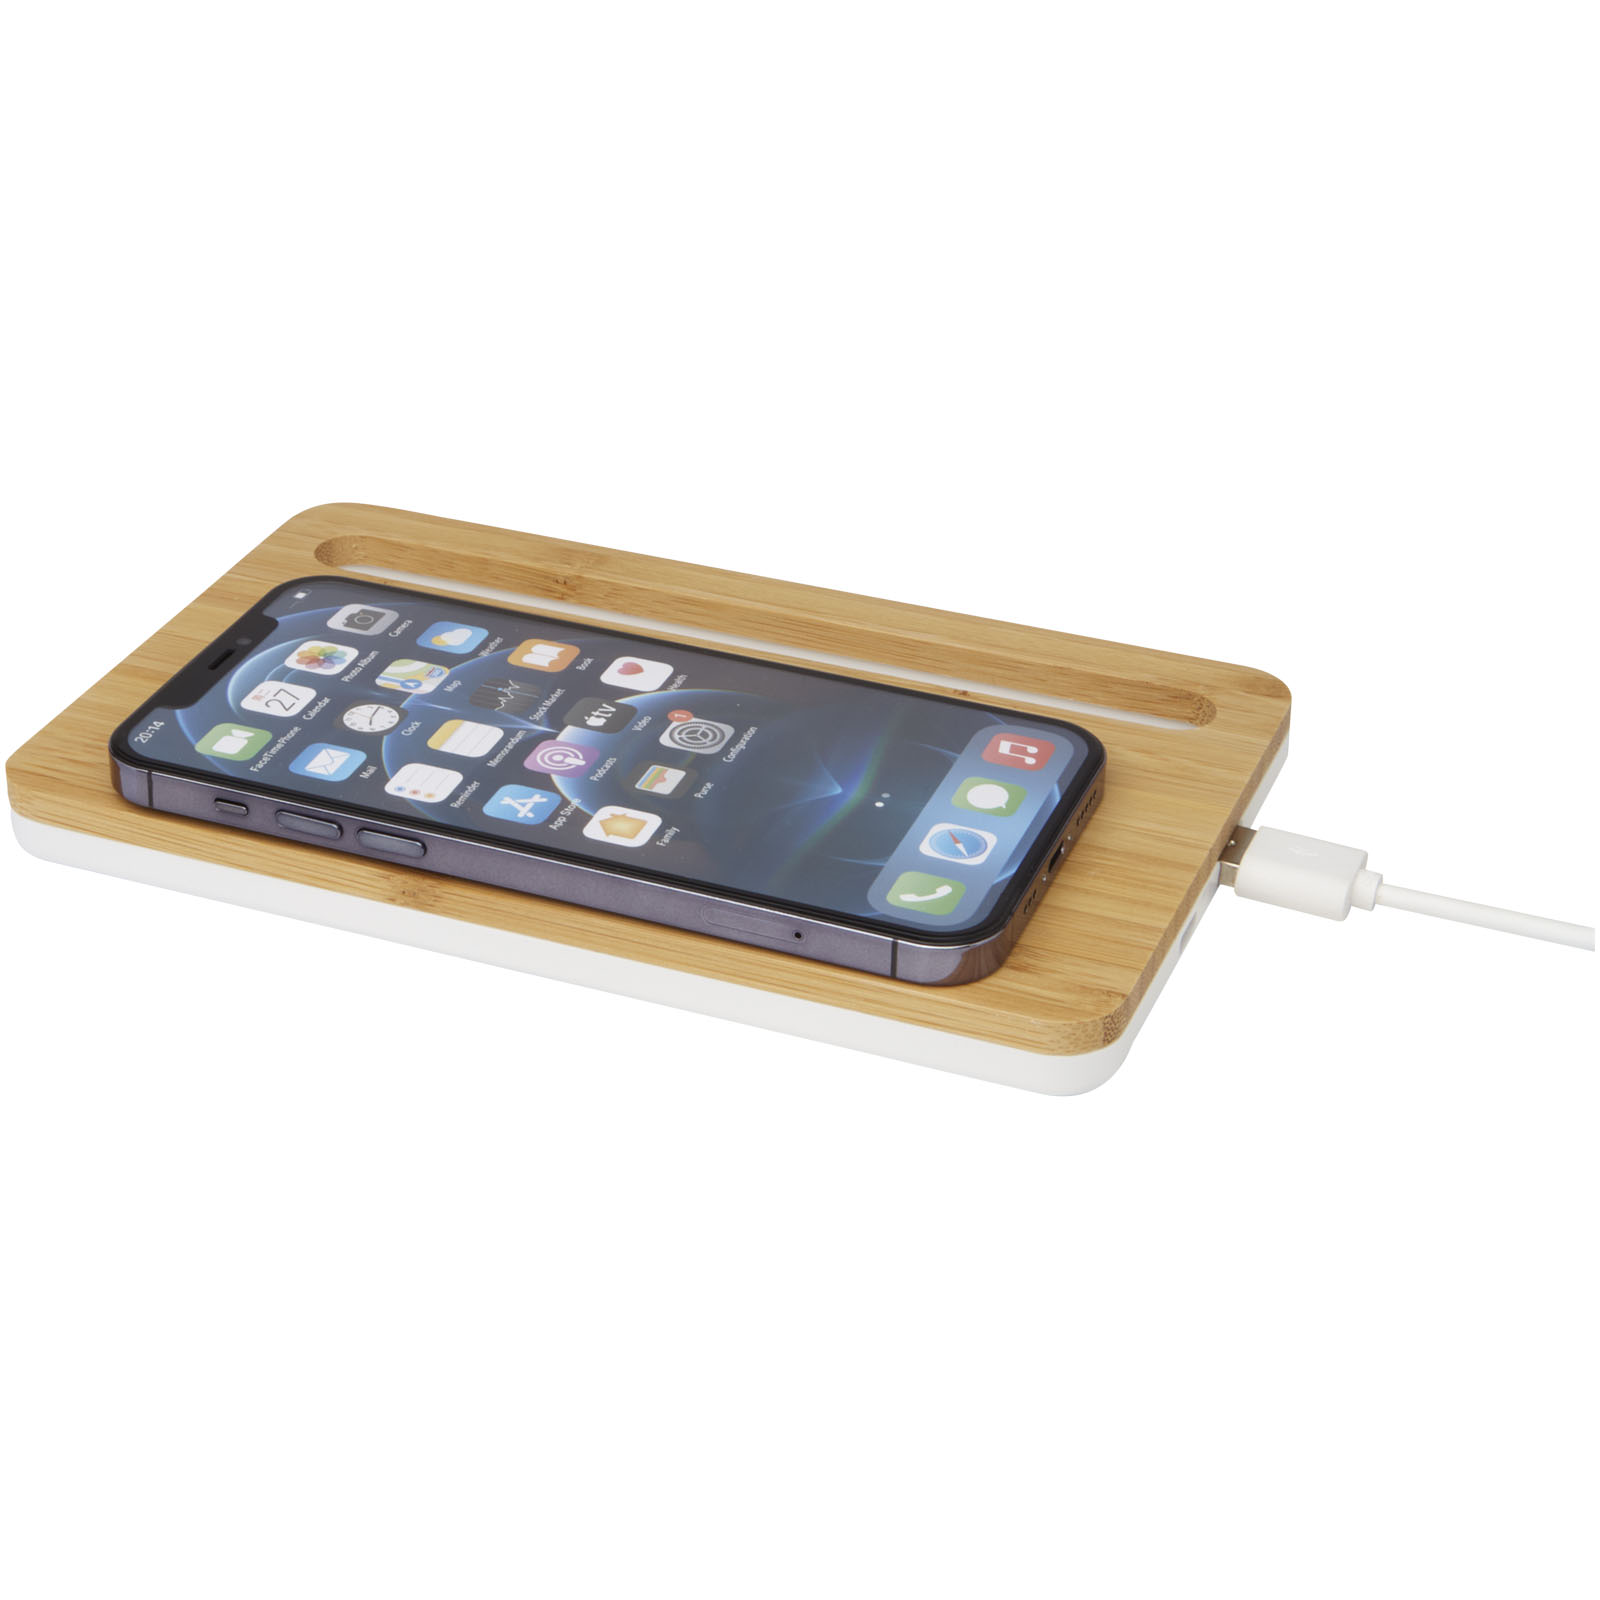 Bamboo Wireless Charger - Box - Houghton-le-Spring